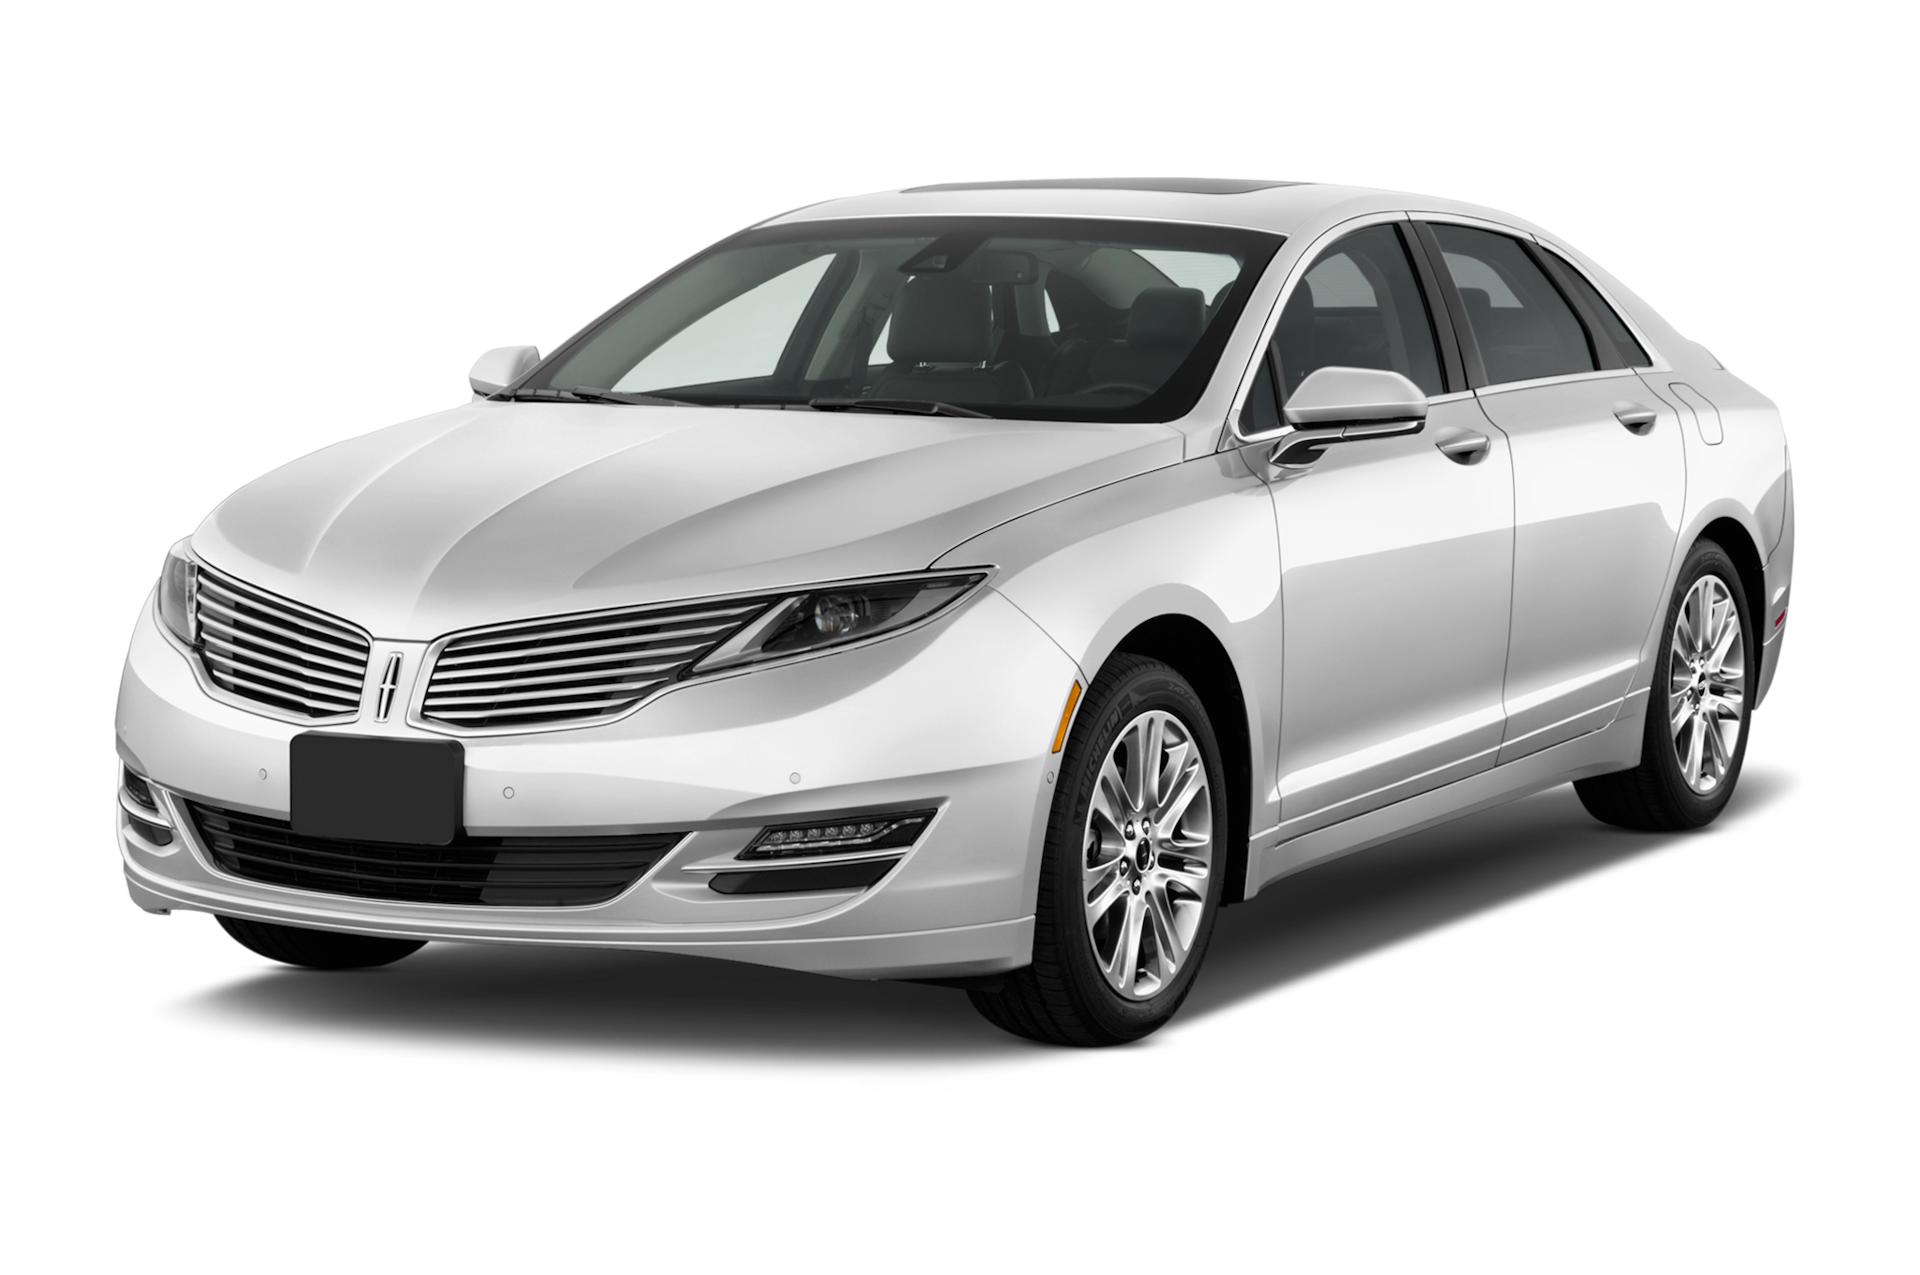 2015 Lincoln MKZ Hybrid Prices, Reviews, and Photos - MotorTrend